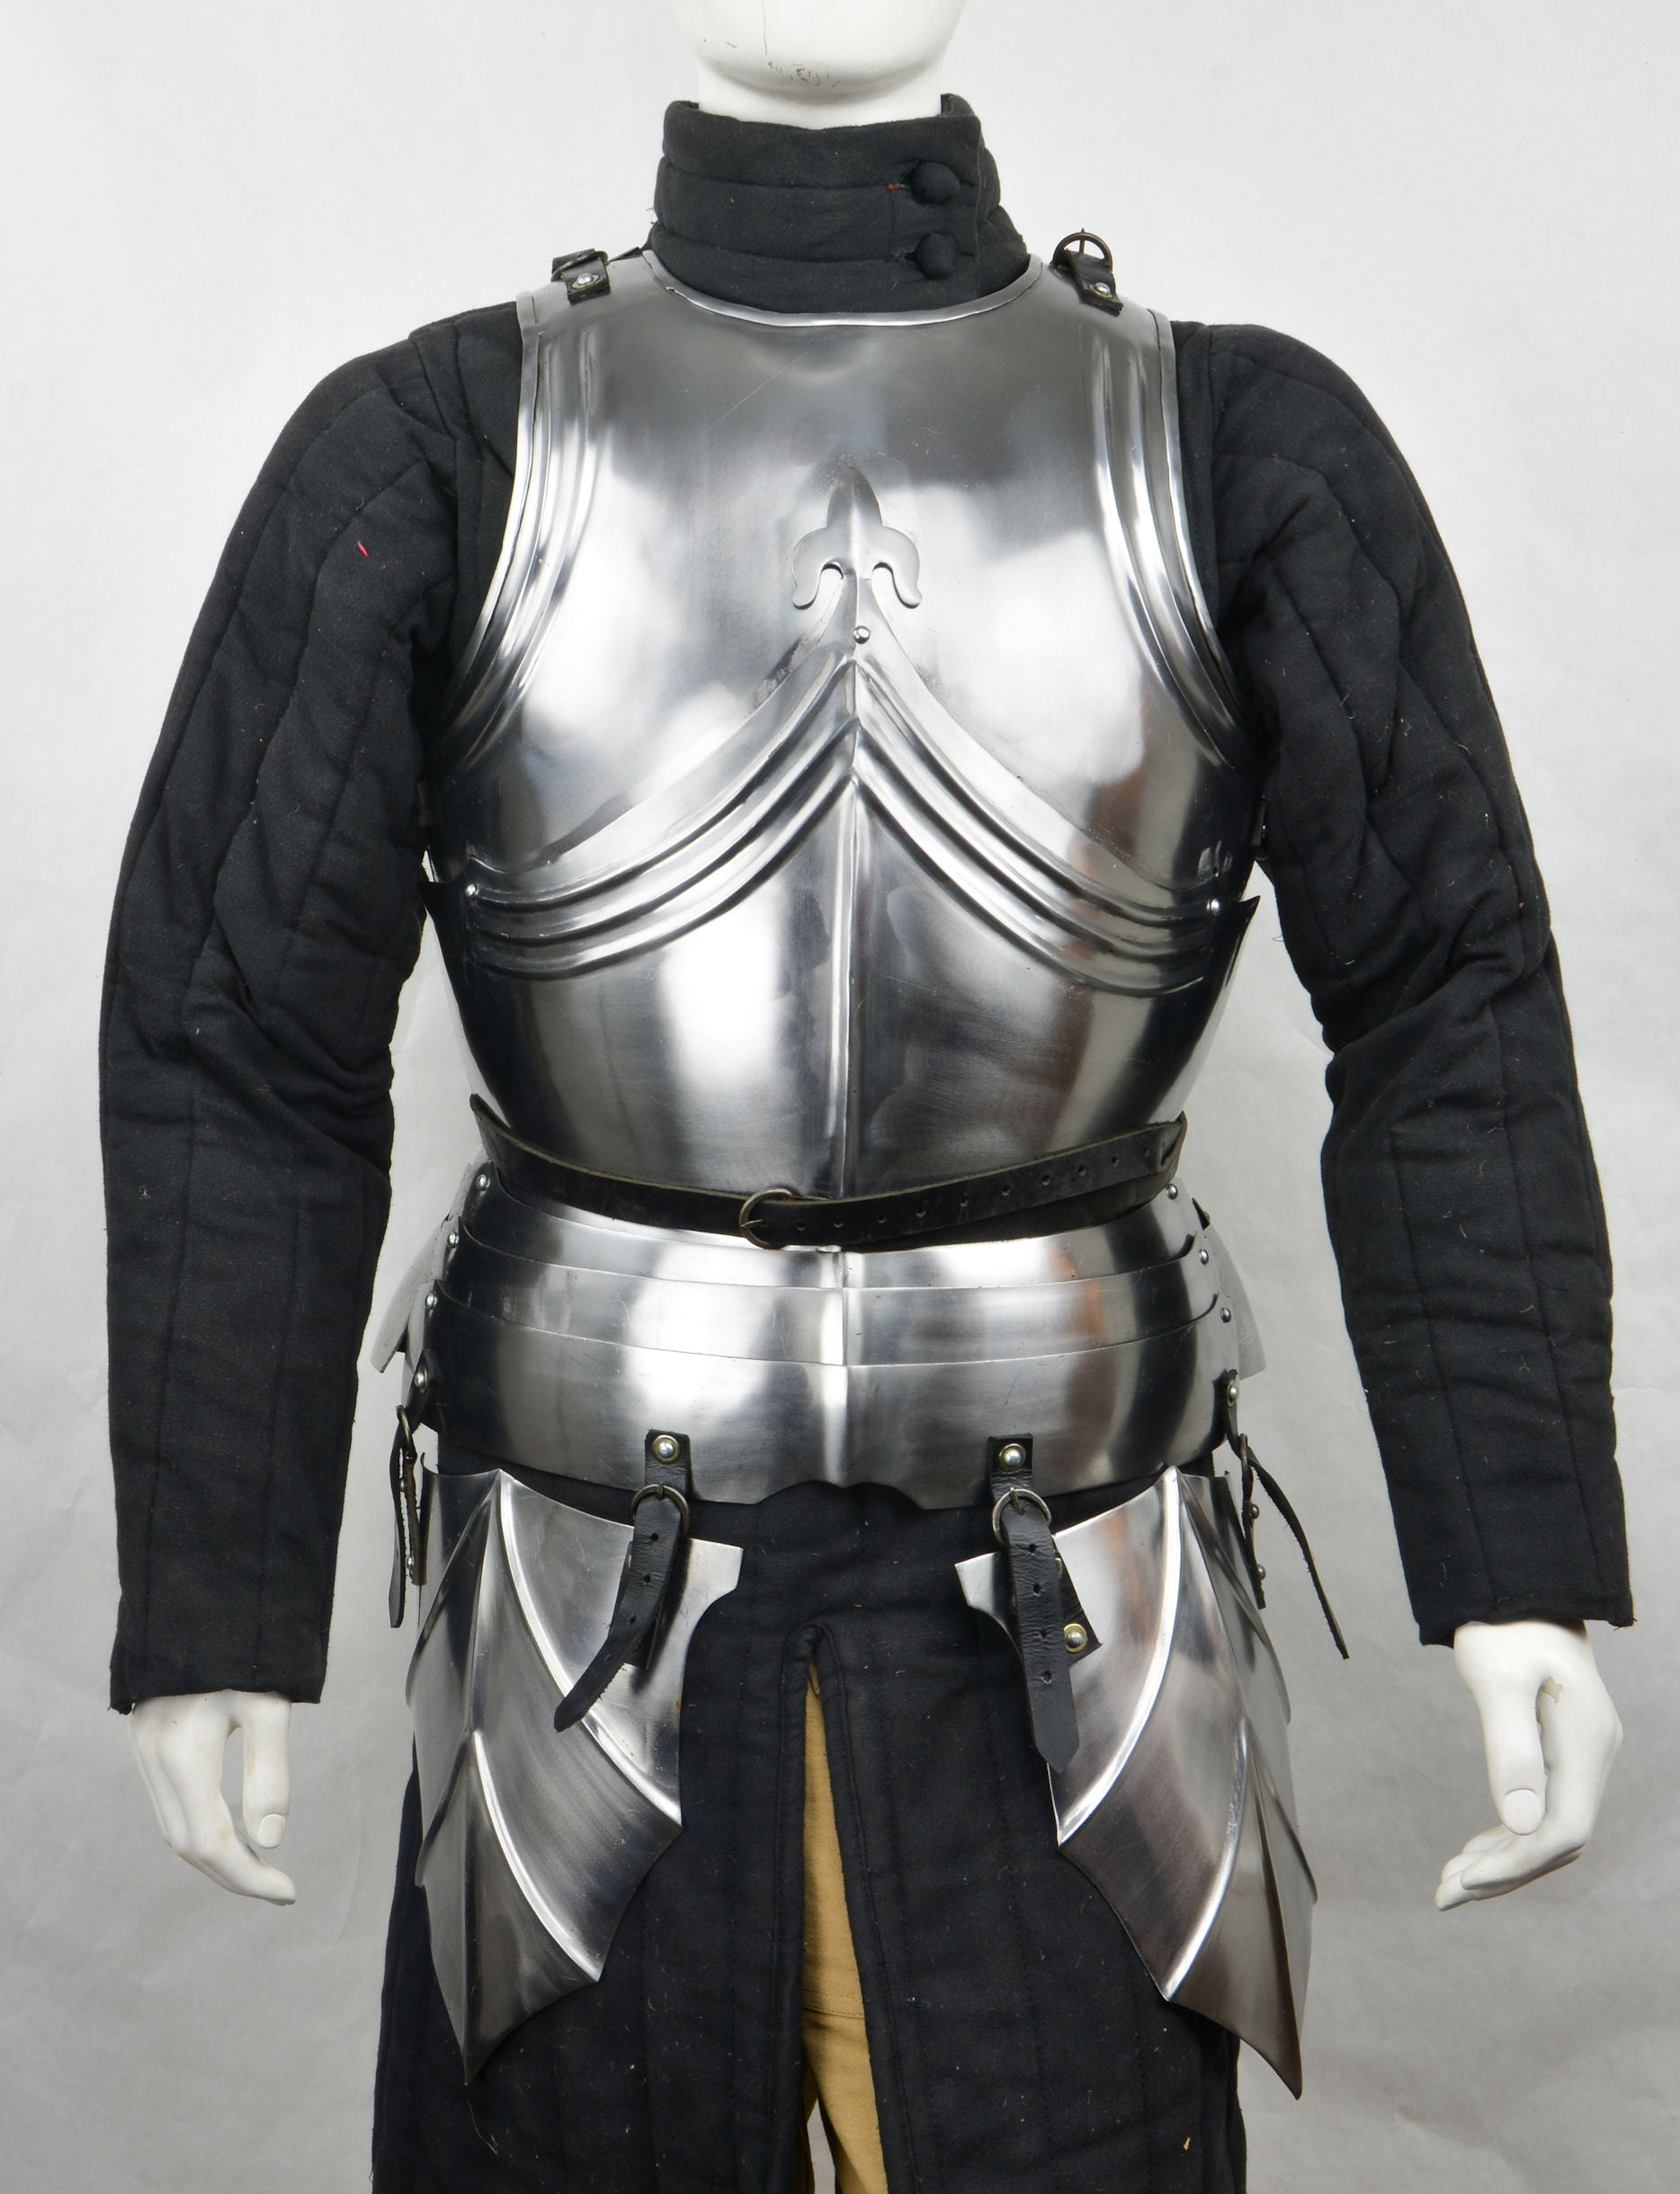 Late Medieval Gothic Cuirass with Tassets - 18 Gauge Steel